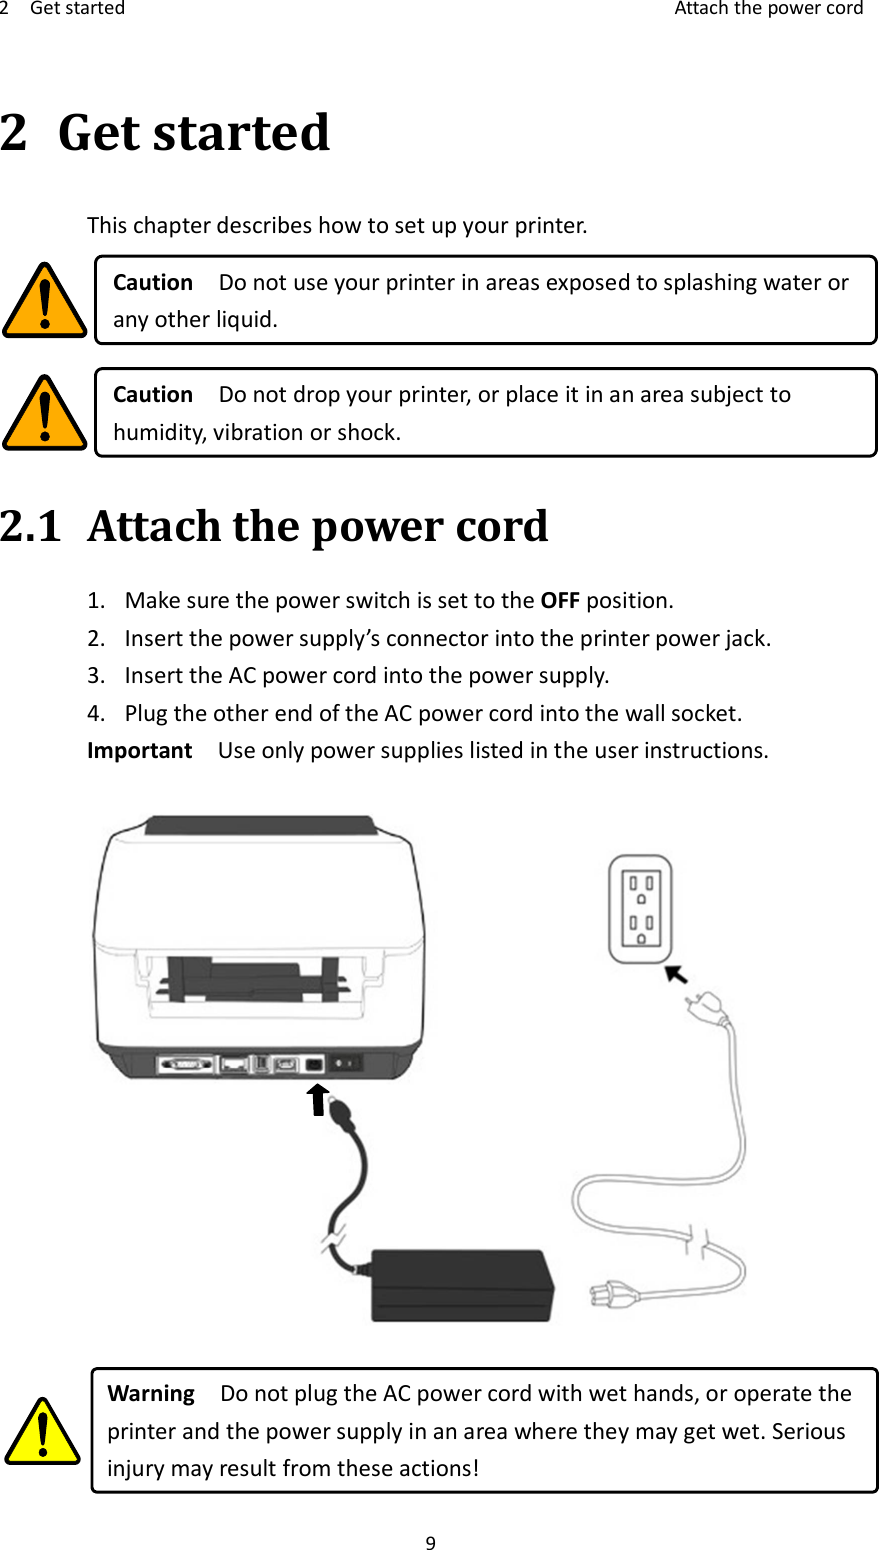 2    Get started    Attach the power cord 9 2 Get started This chapter describes how to set up your printer.  Caution    Do not use your printer in areas exposed to splashing water or any other liquid.  Caution    Do not drop your printer, or place it in an area subject to humidity, vibration or shock. 2.1 Attach the power cord   1. Make sure the power switch is set to the OFF position. 2. Insert the power supply’s connector into the printer power jack. 3. Insert the AC power cord into the power supply. 4. Plug the other end of the AC power cord into the wall socket. Important    Use only power supplies listed in the user instructions.     Warning    Do not plug the AC power cord with wet hands, or operate the printer and the power supply in an area where they may get wet. Serious injury may result from these actions! 